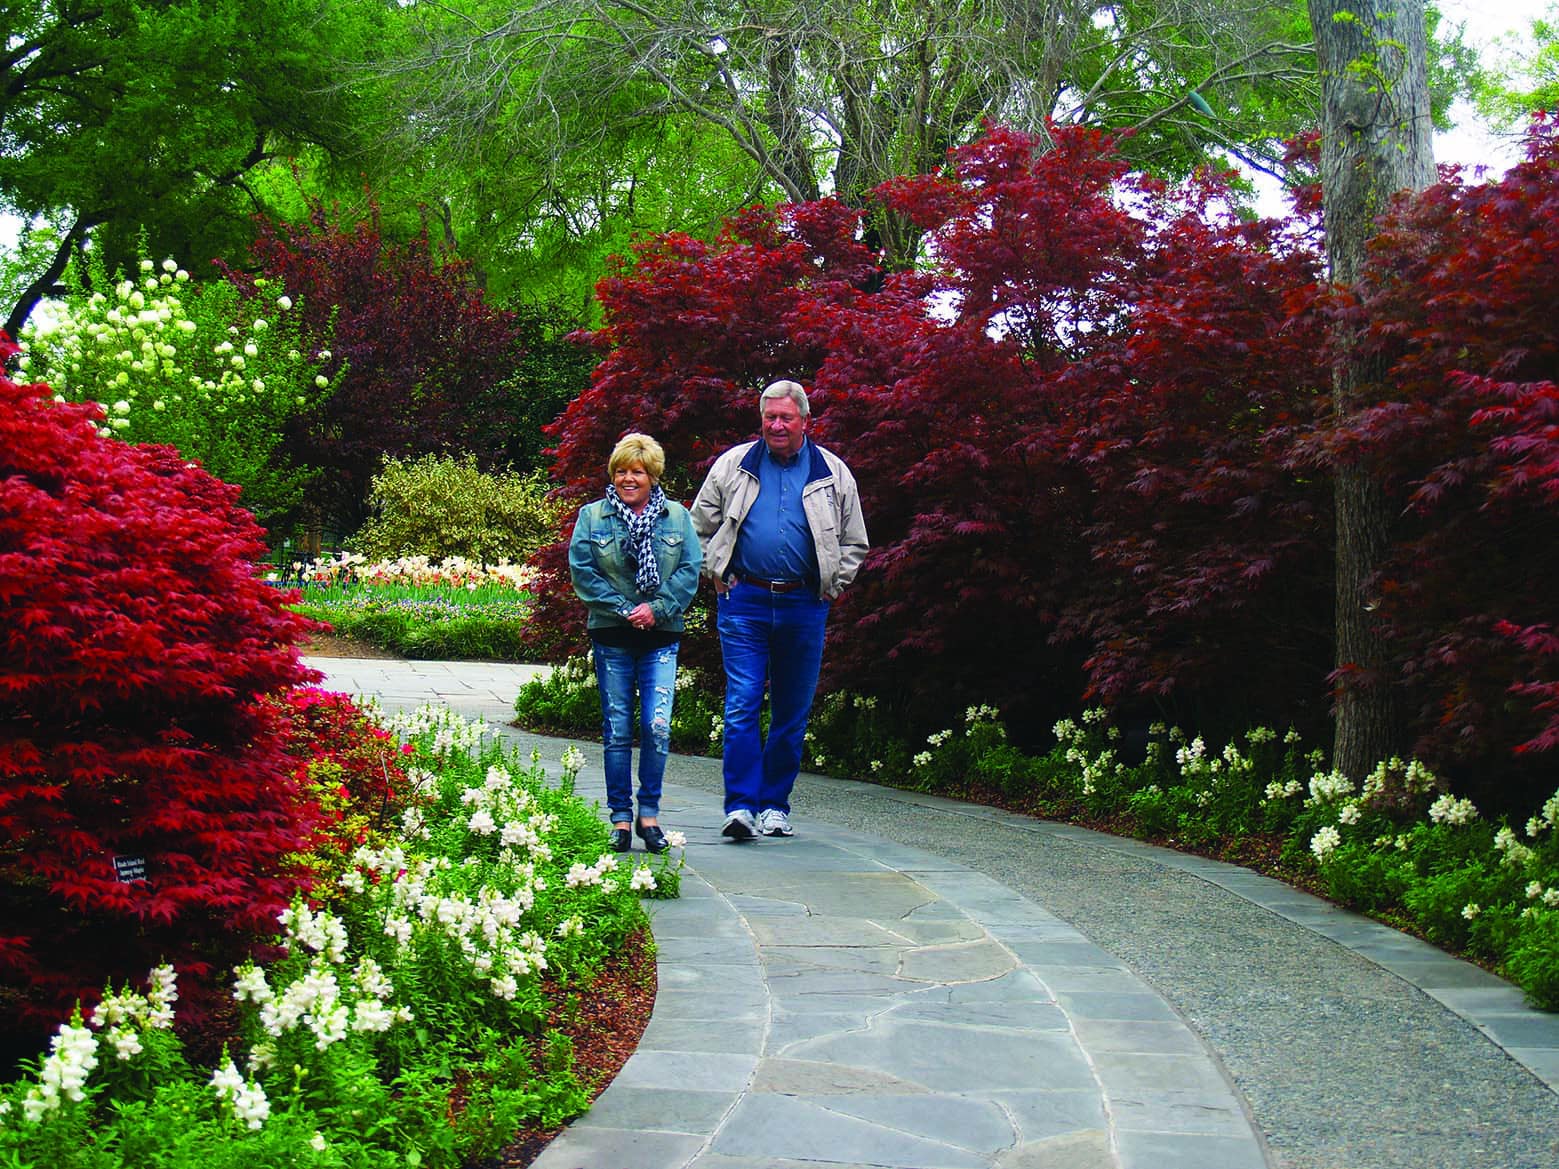 get your groove on at dallas arboretum and botanical gardens - focus